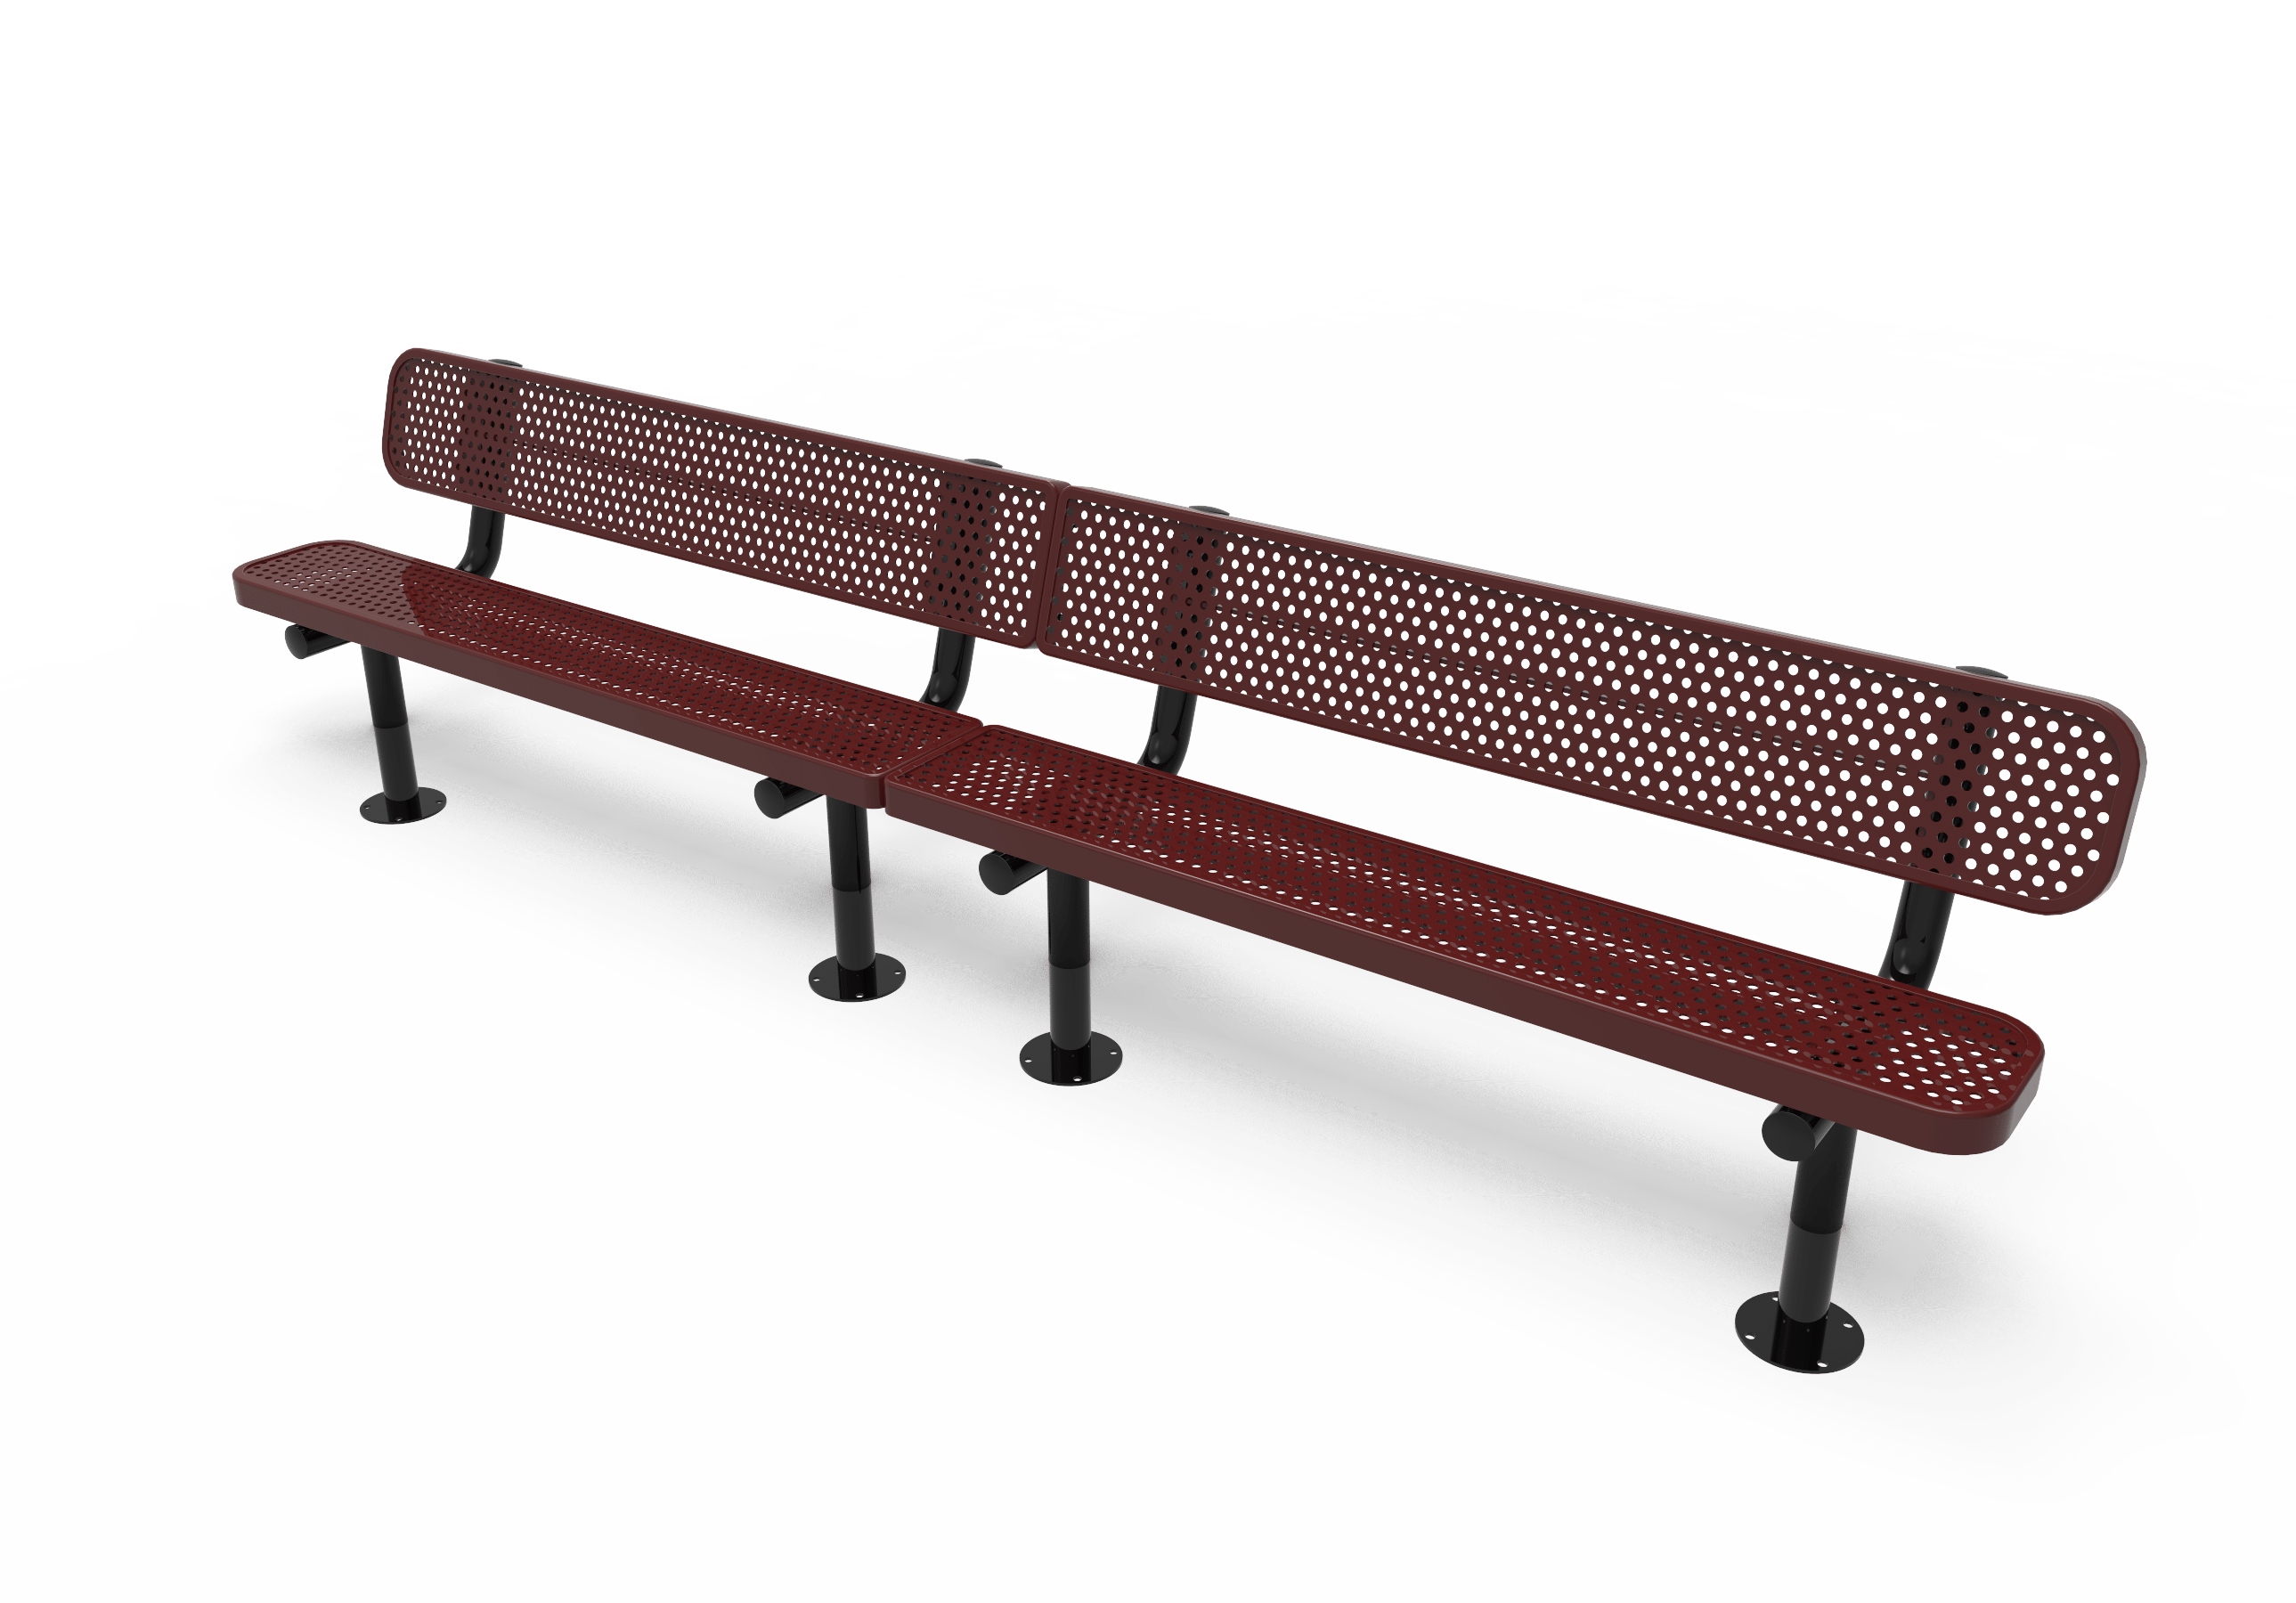 10′ Standard Bench With Back-Punched
BRT10-D-20-000
Industry Standard Finish
$959.00
BRT10-B-20-000
Advantage Premium Finish
$1189.00
